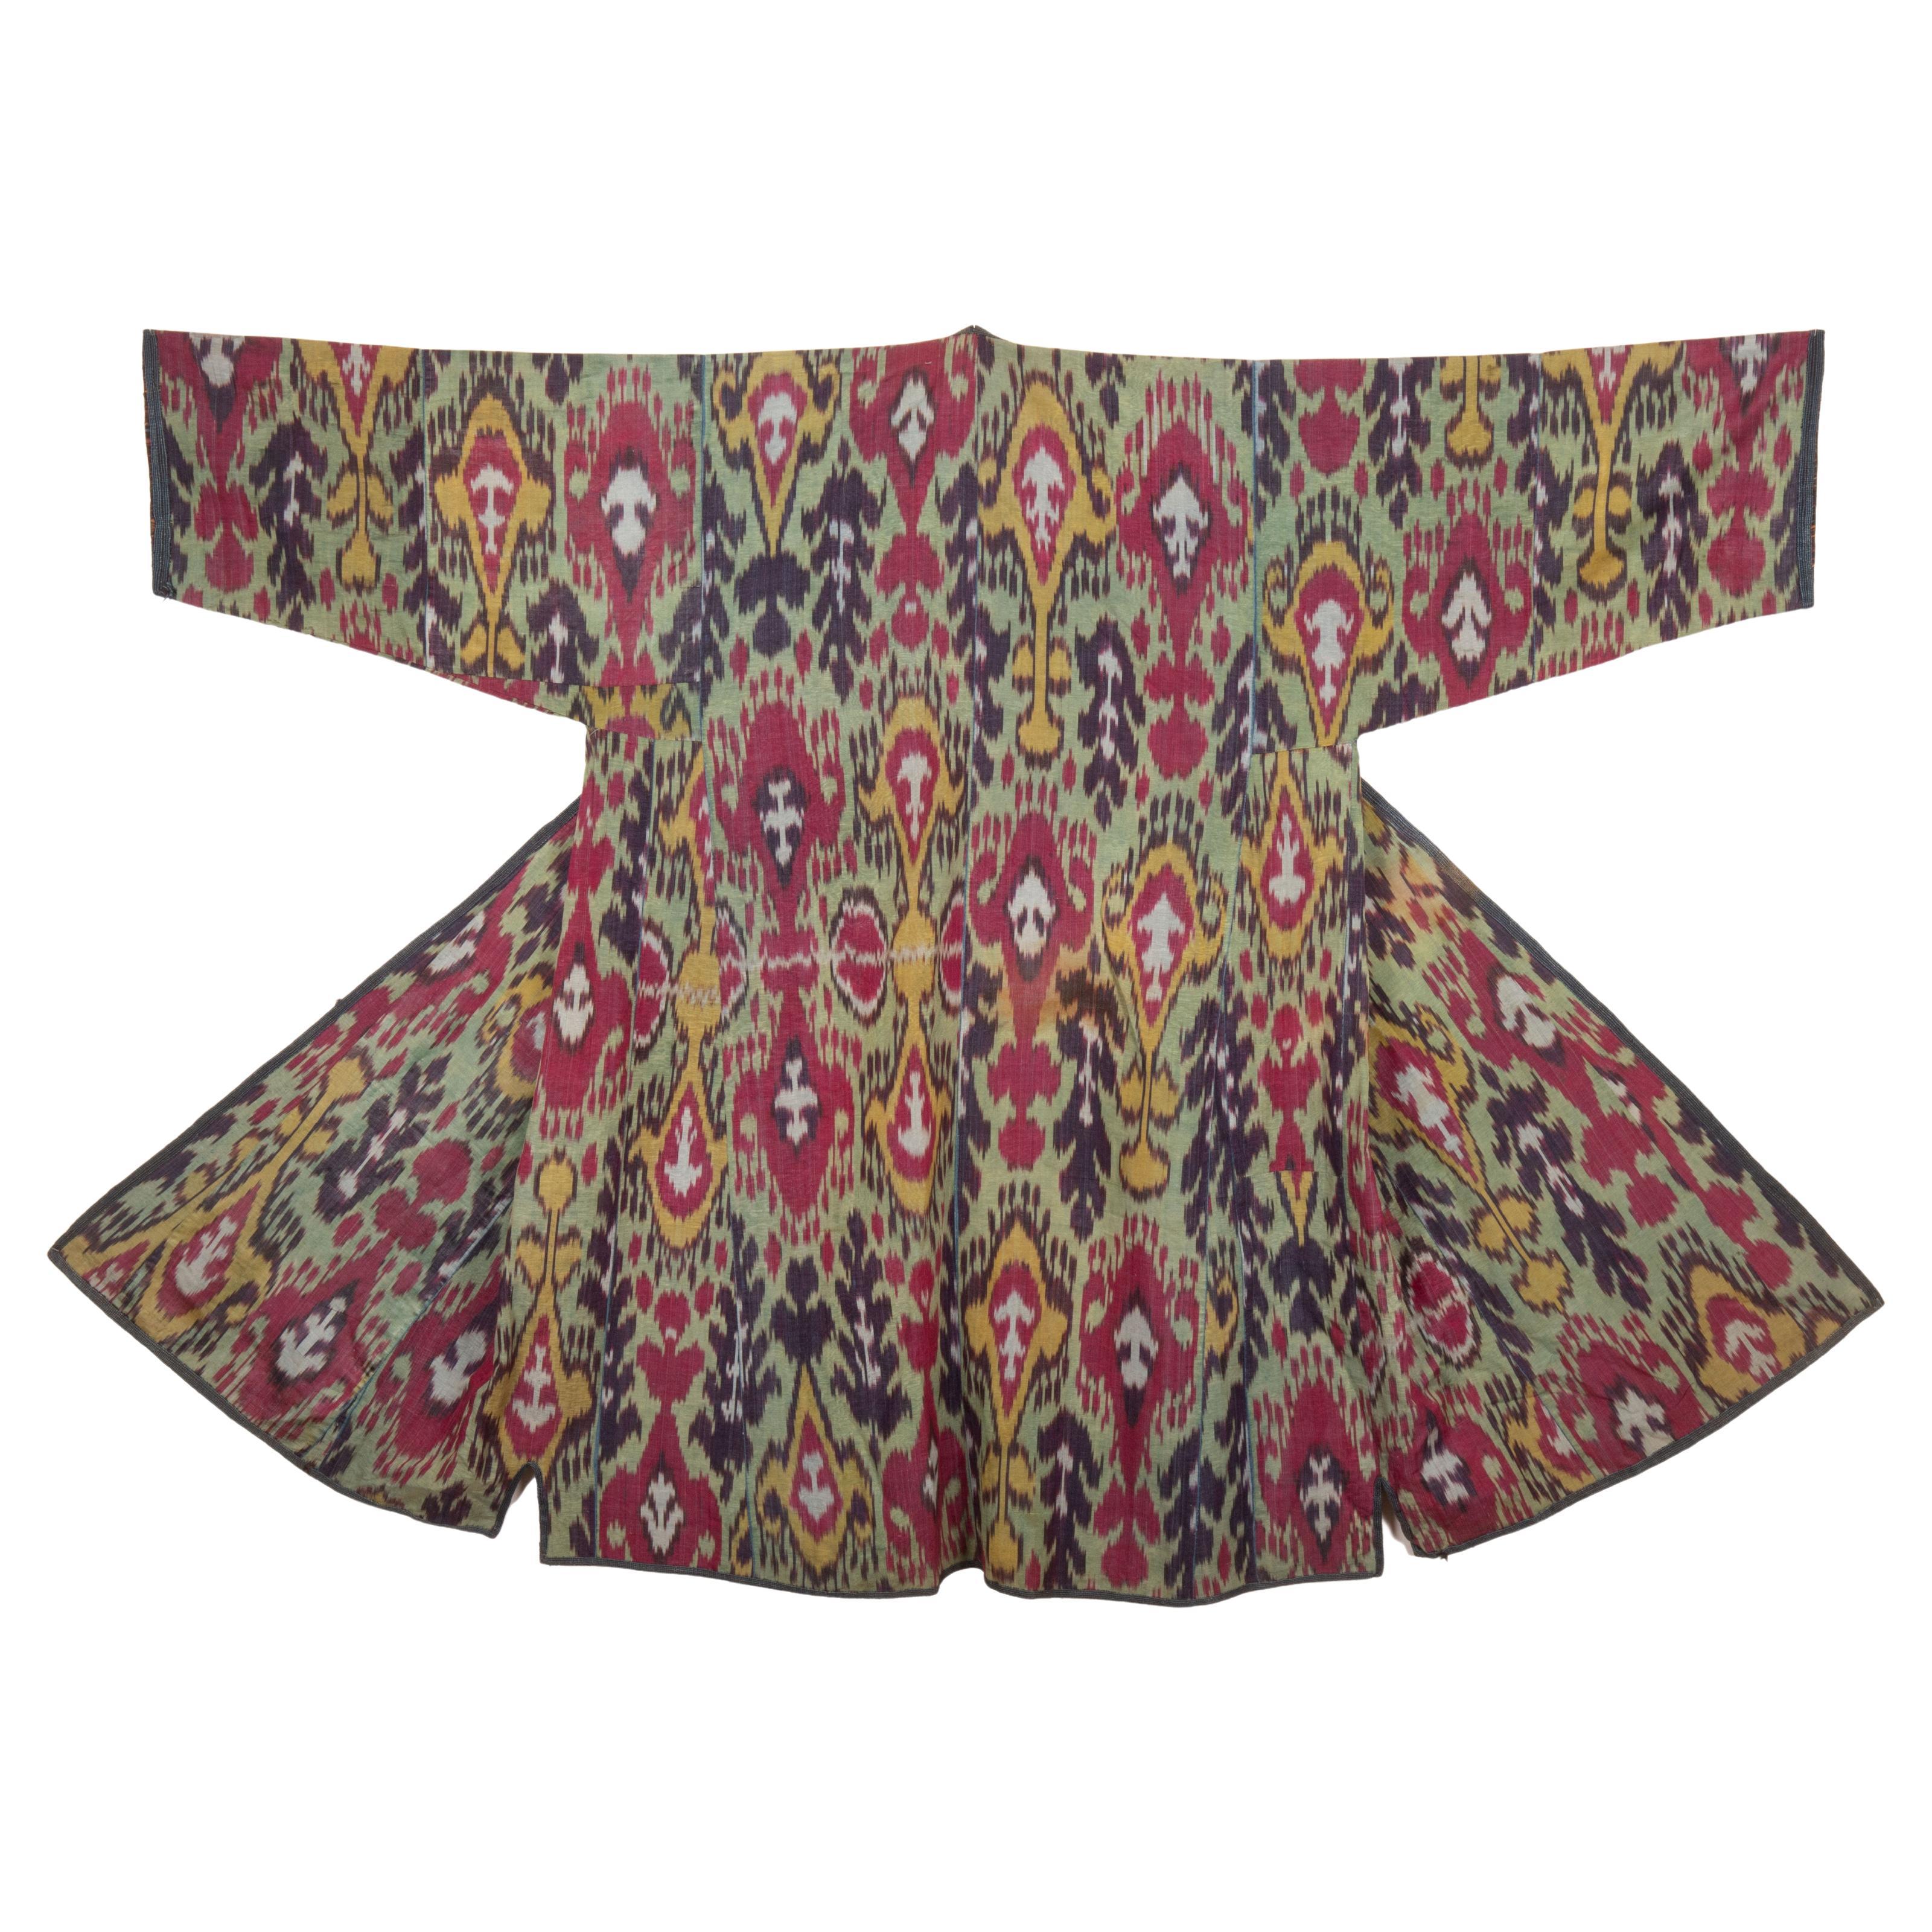 Antique Ikat Chapan with a Good Mix of Roller Printed Lining, 19th Century